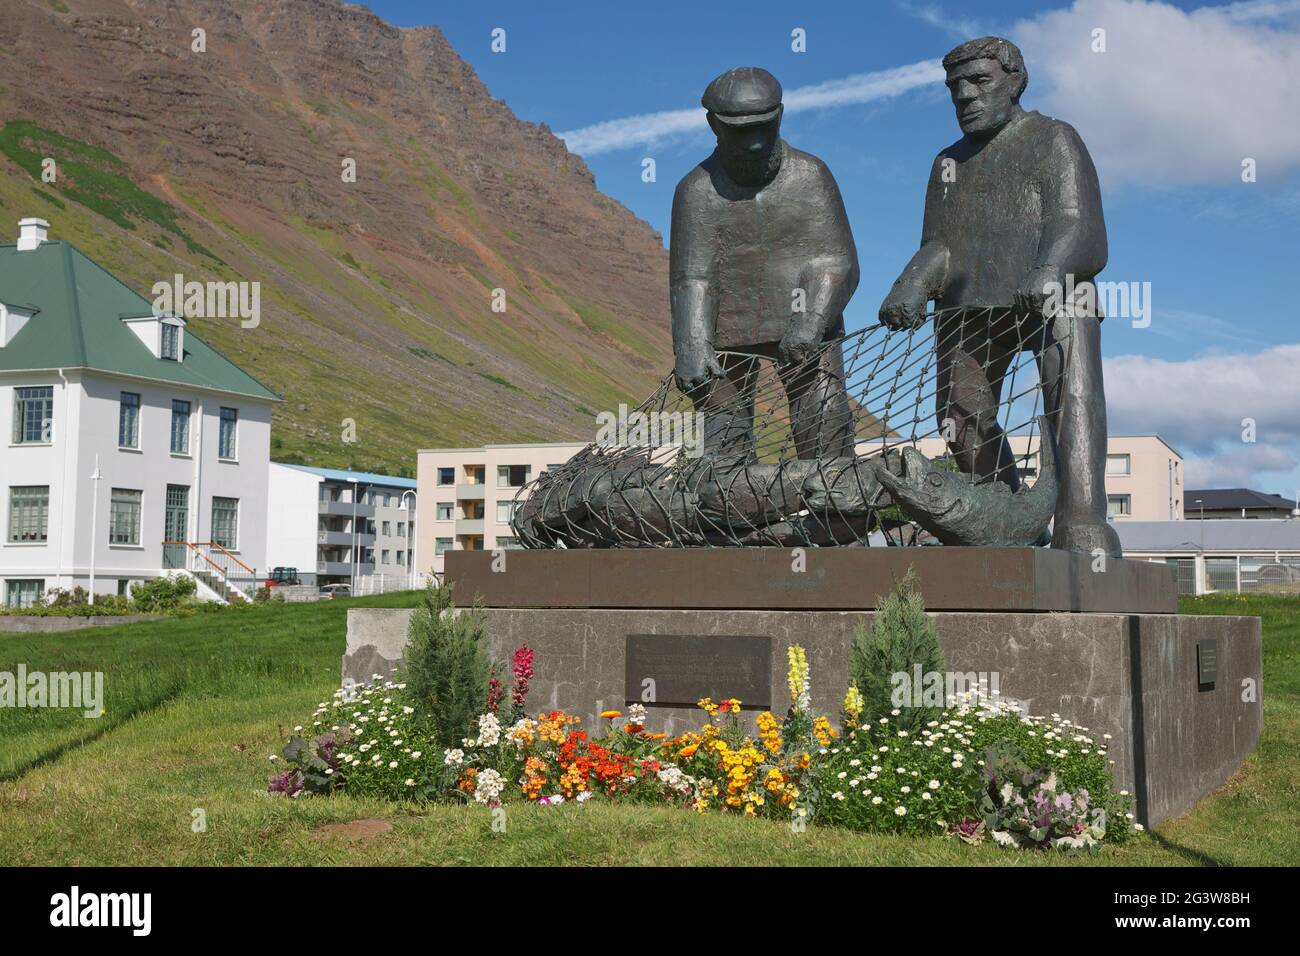 The Fisherman's Monument is a sculpture in Isafjordur, a town in Northern Iceland. It commemorates t Stock Photo